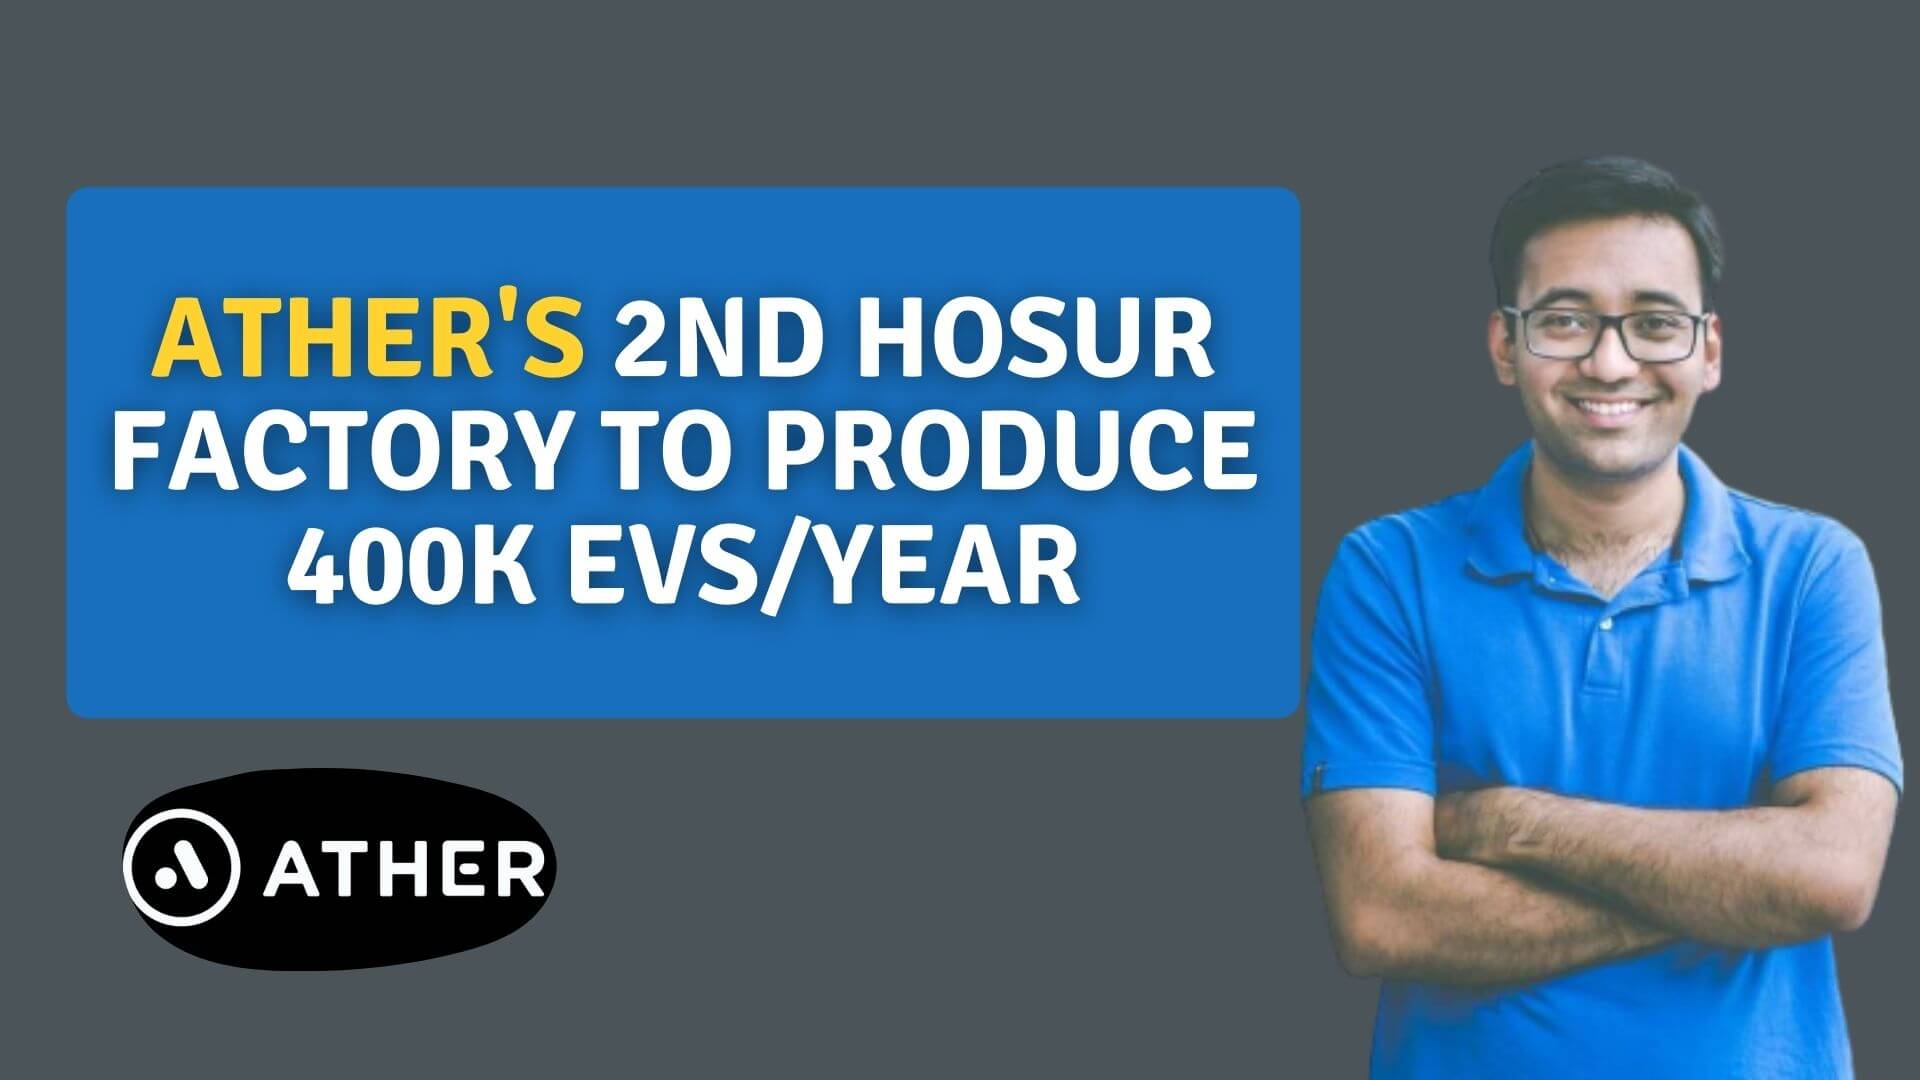 https://e-vehicleinfo.com/ather-energys-2nd-hosur-factory-to-produce-400k-evs-year/